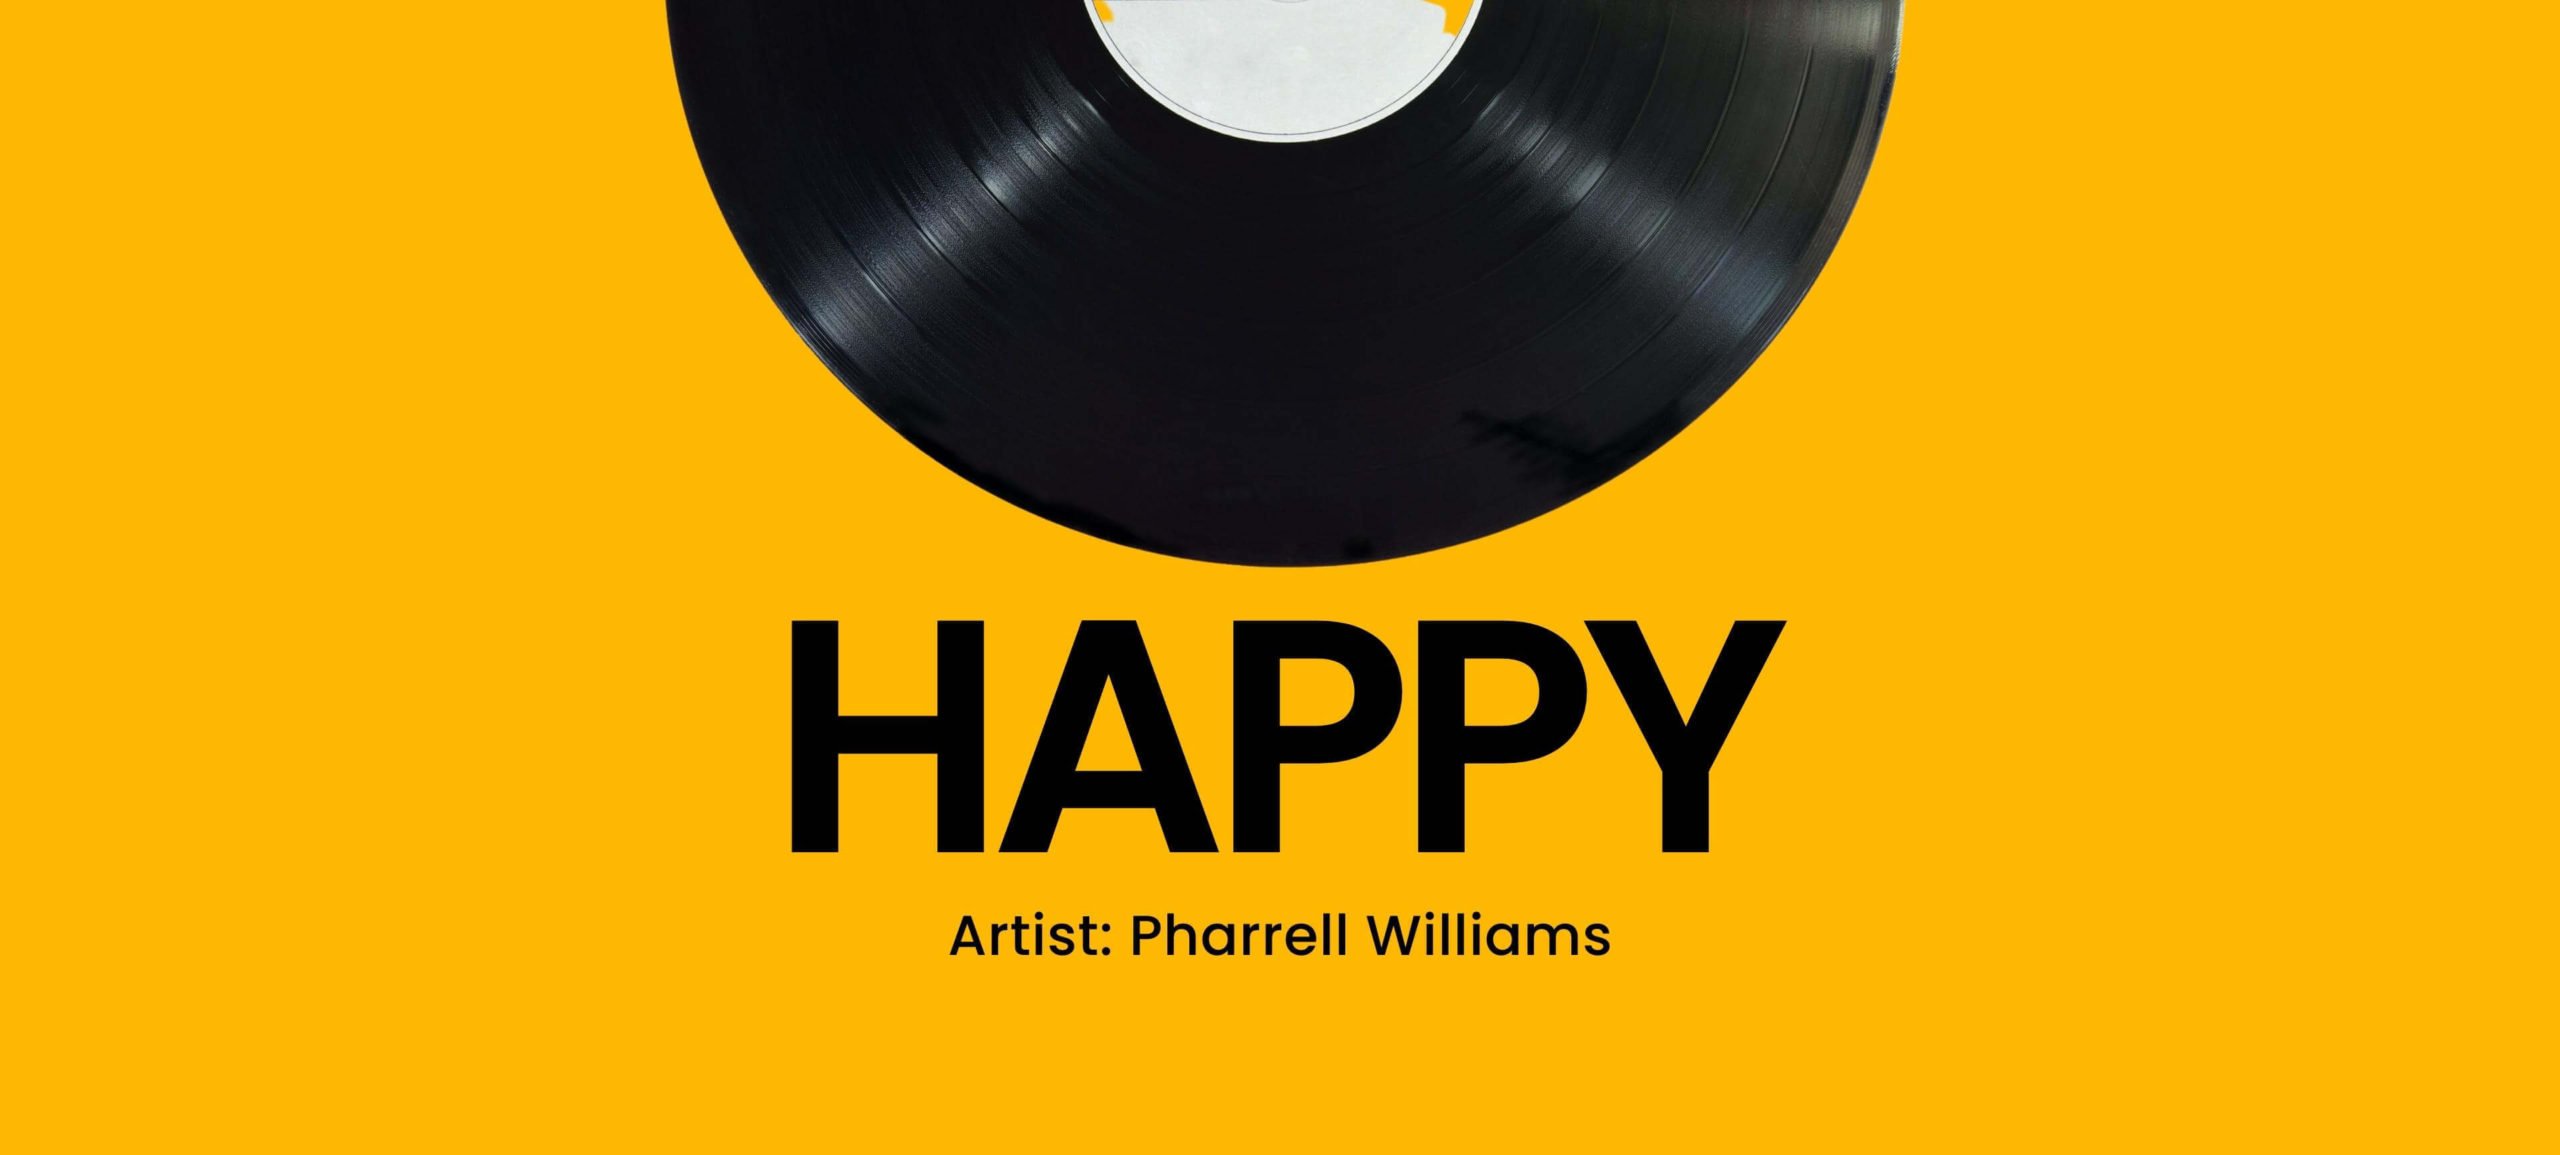 Happy Song on spotify